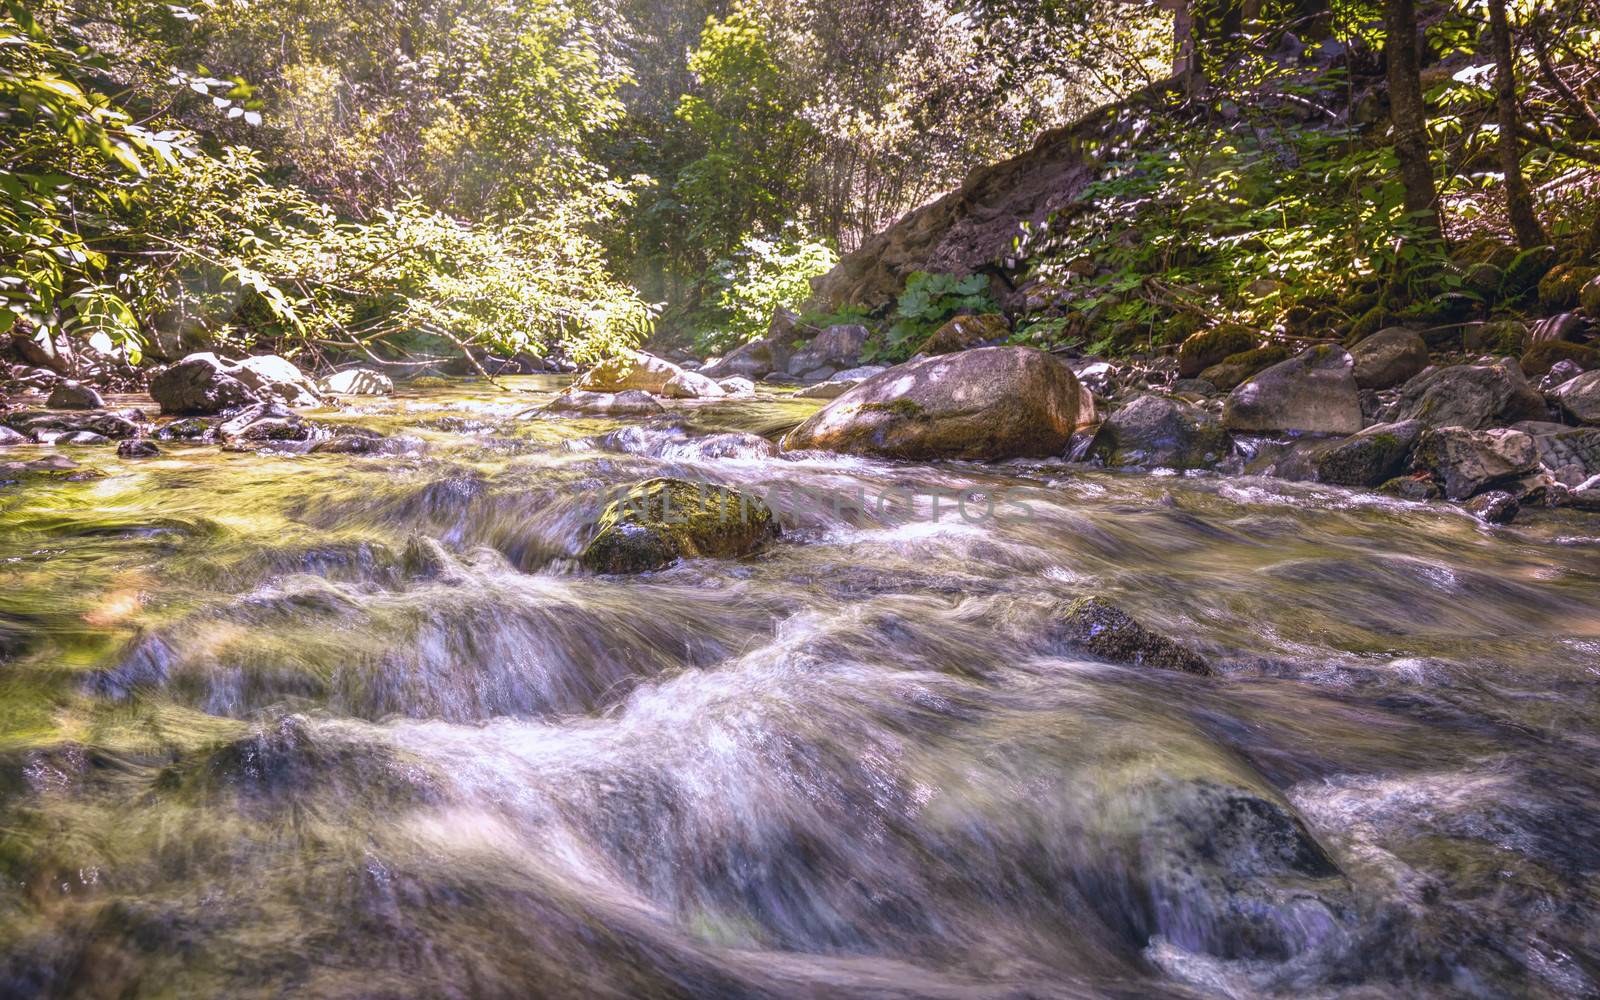 A Small River in Northern California by backyard_photography